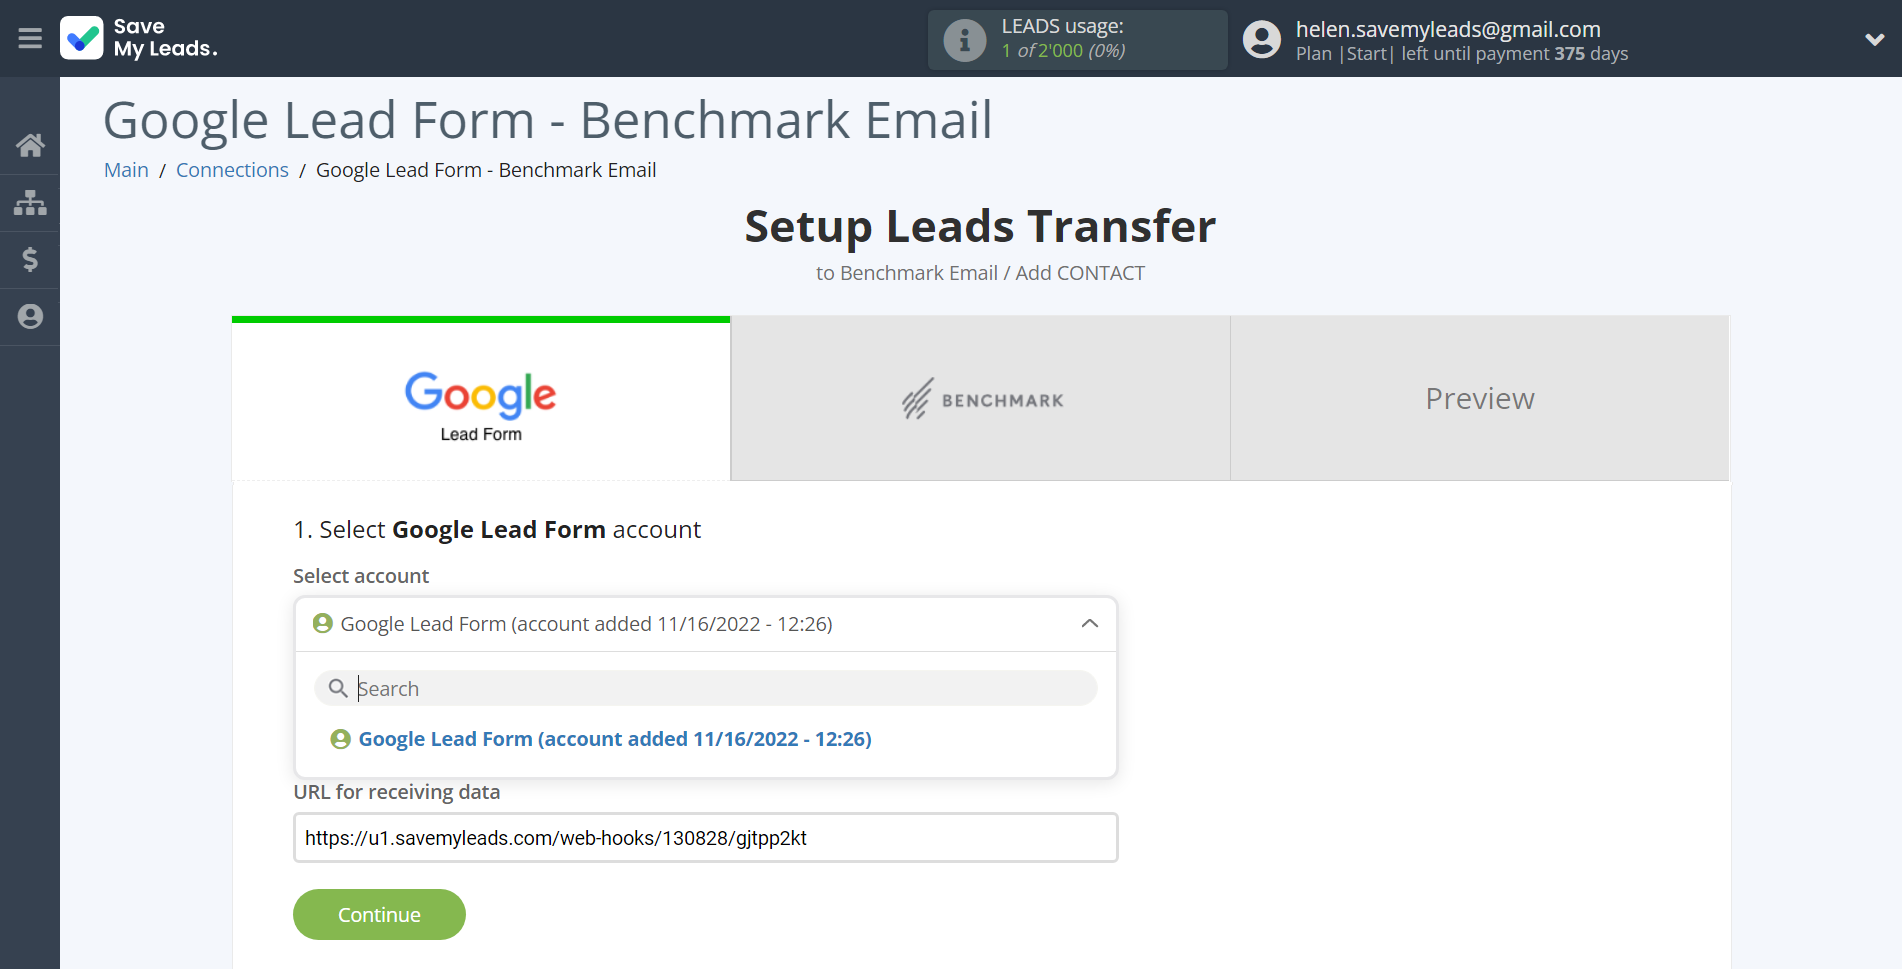 How to Connect Google Lead Form with Benchmark Email | Data Source account selection